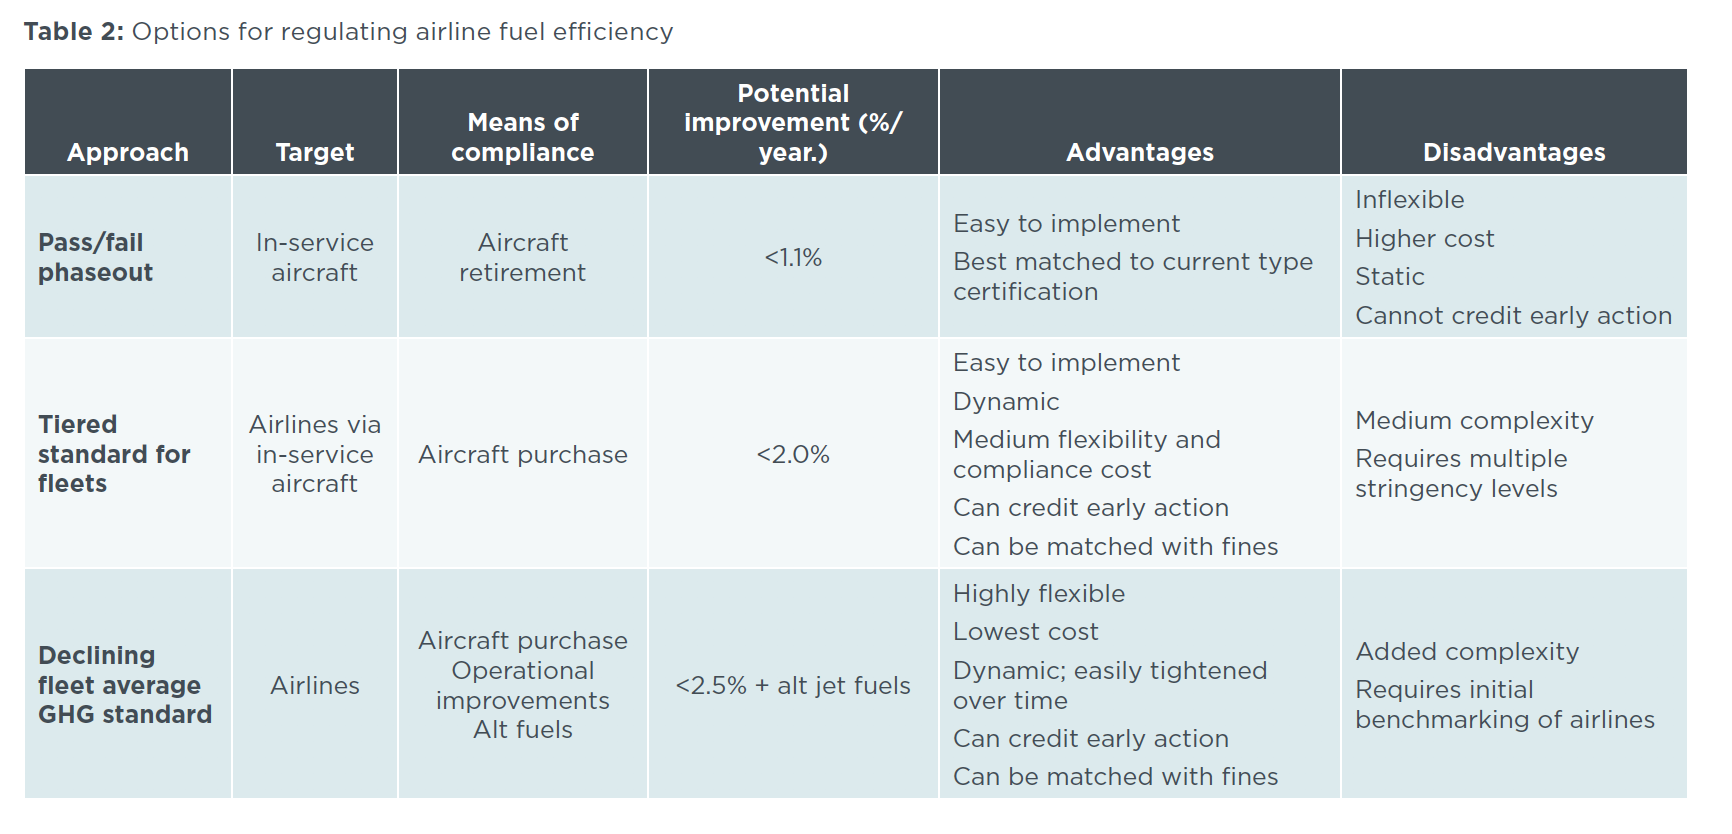 Table 2: Options for regulating airline fuel efficiency